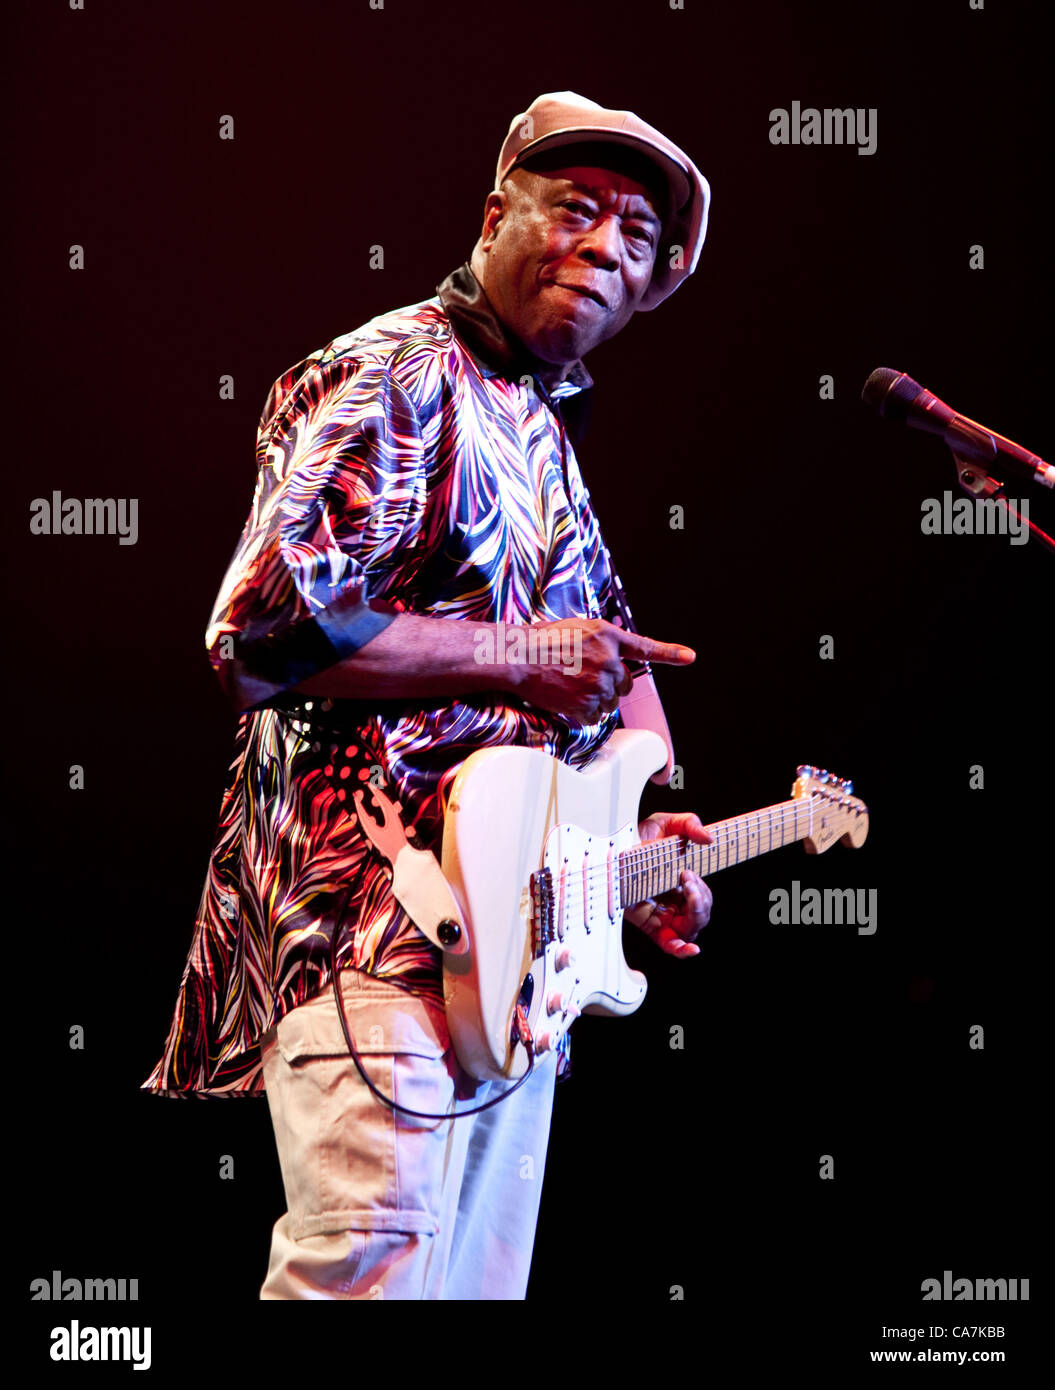 June 21, 2012 Austin, TX.  Buddy Guy plays at Austin City Limits Live at The Moody Theater. Stock Photo